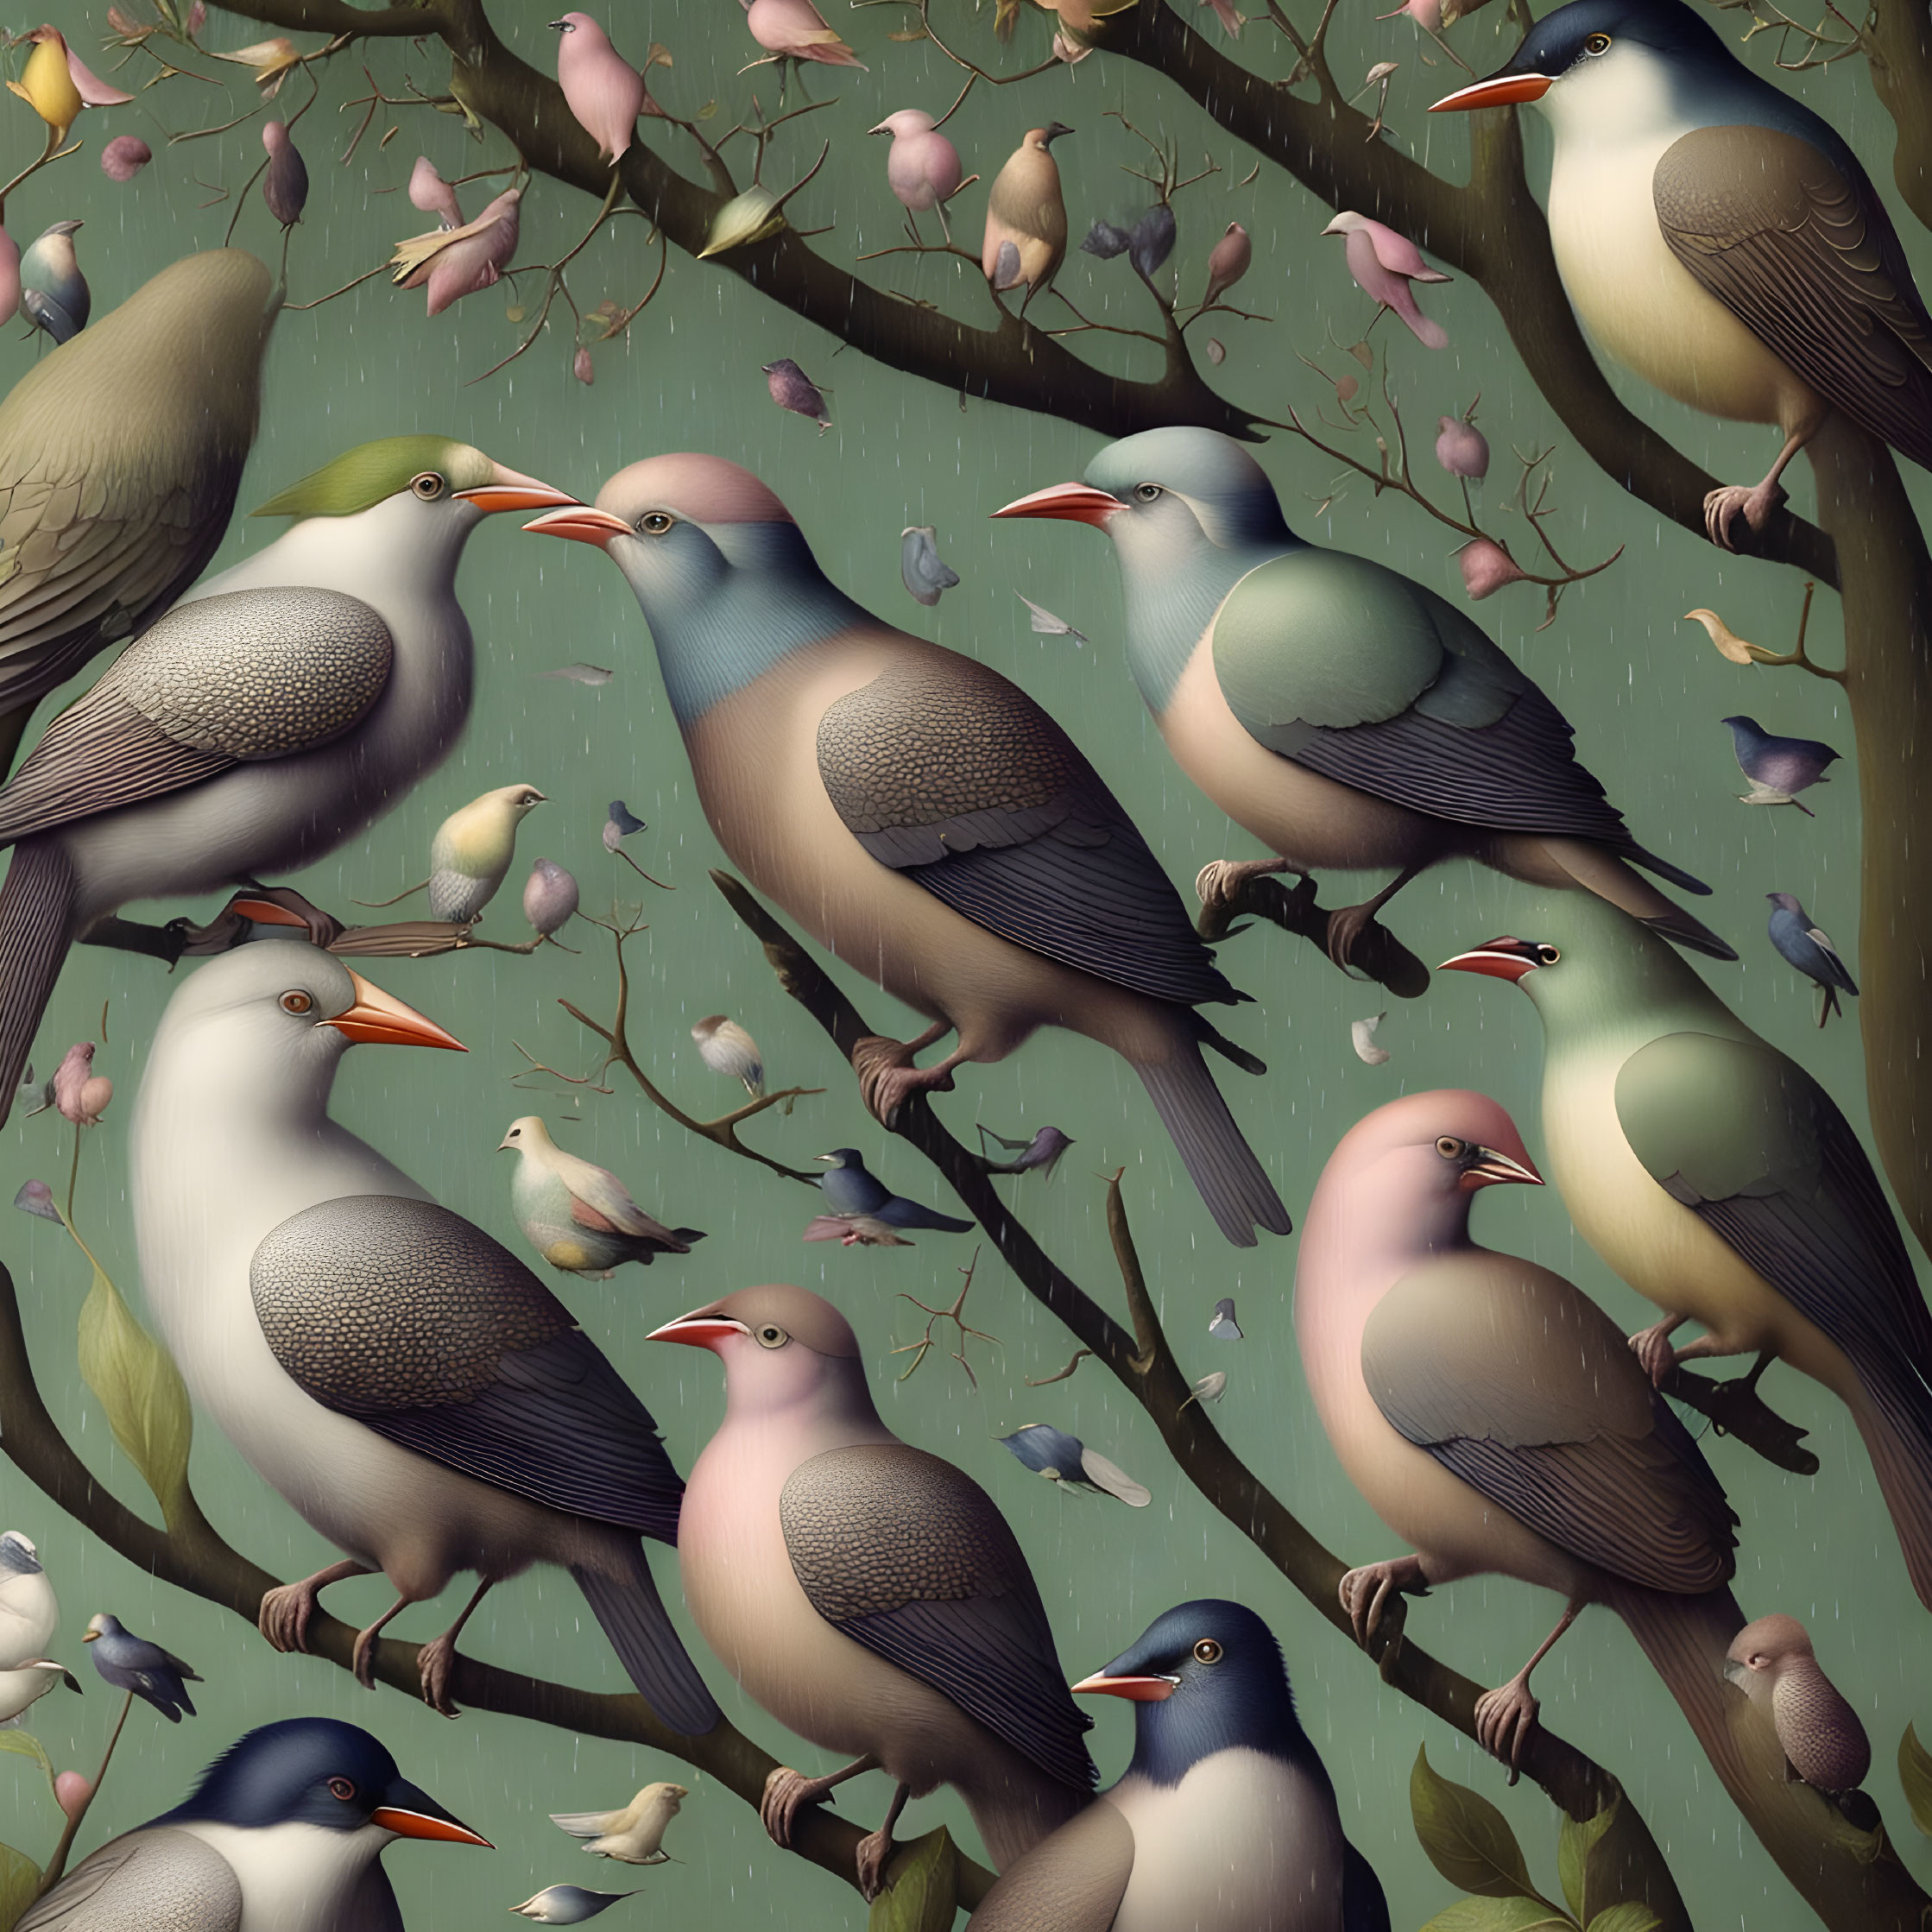 Stylized birds on branches with hyperrealistic texture